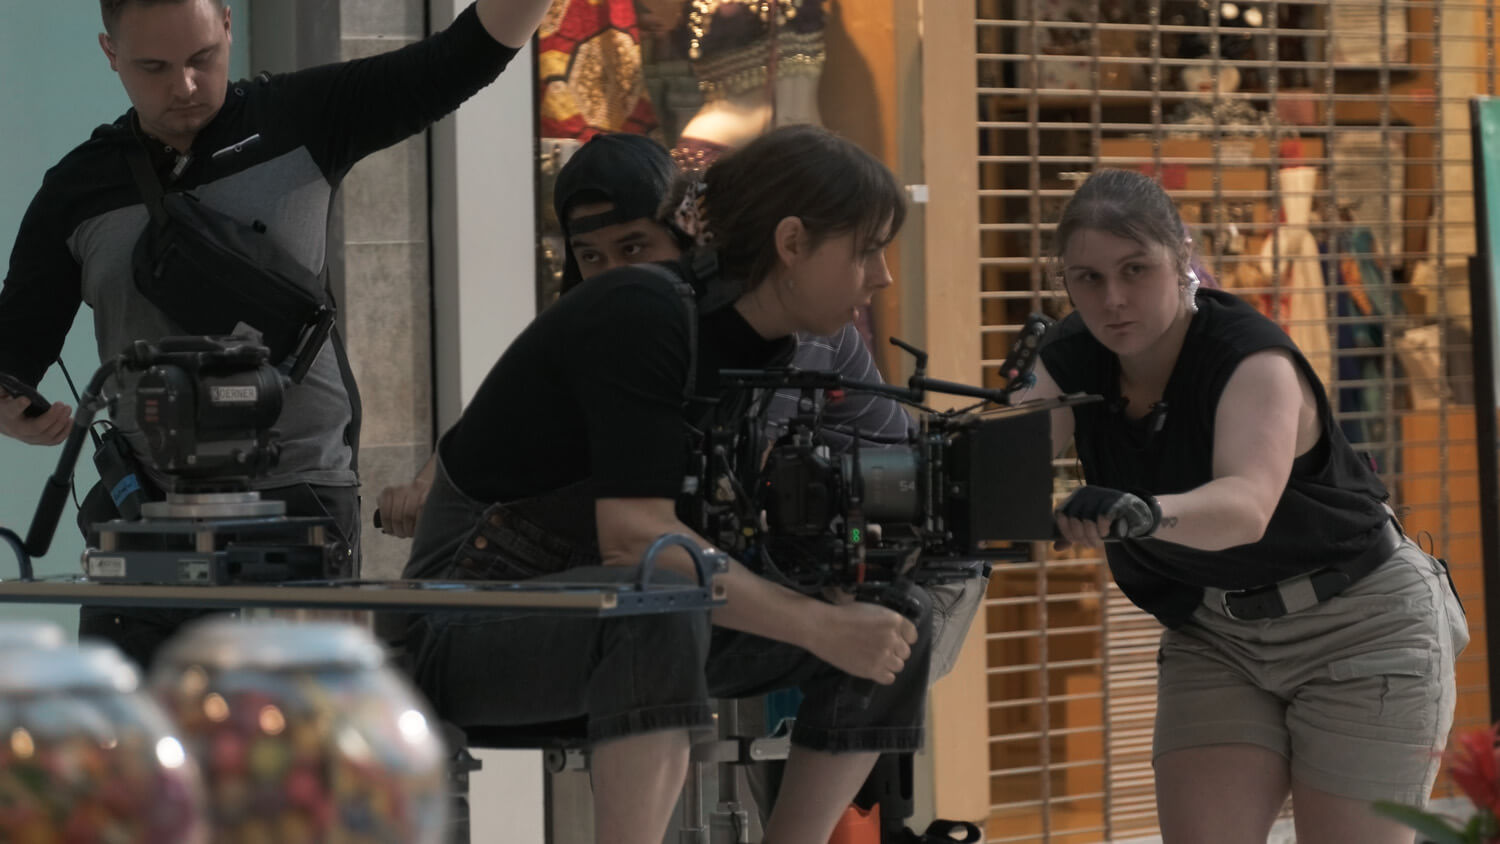 Film crew working to set up a shot on a film set